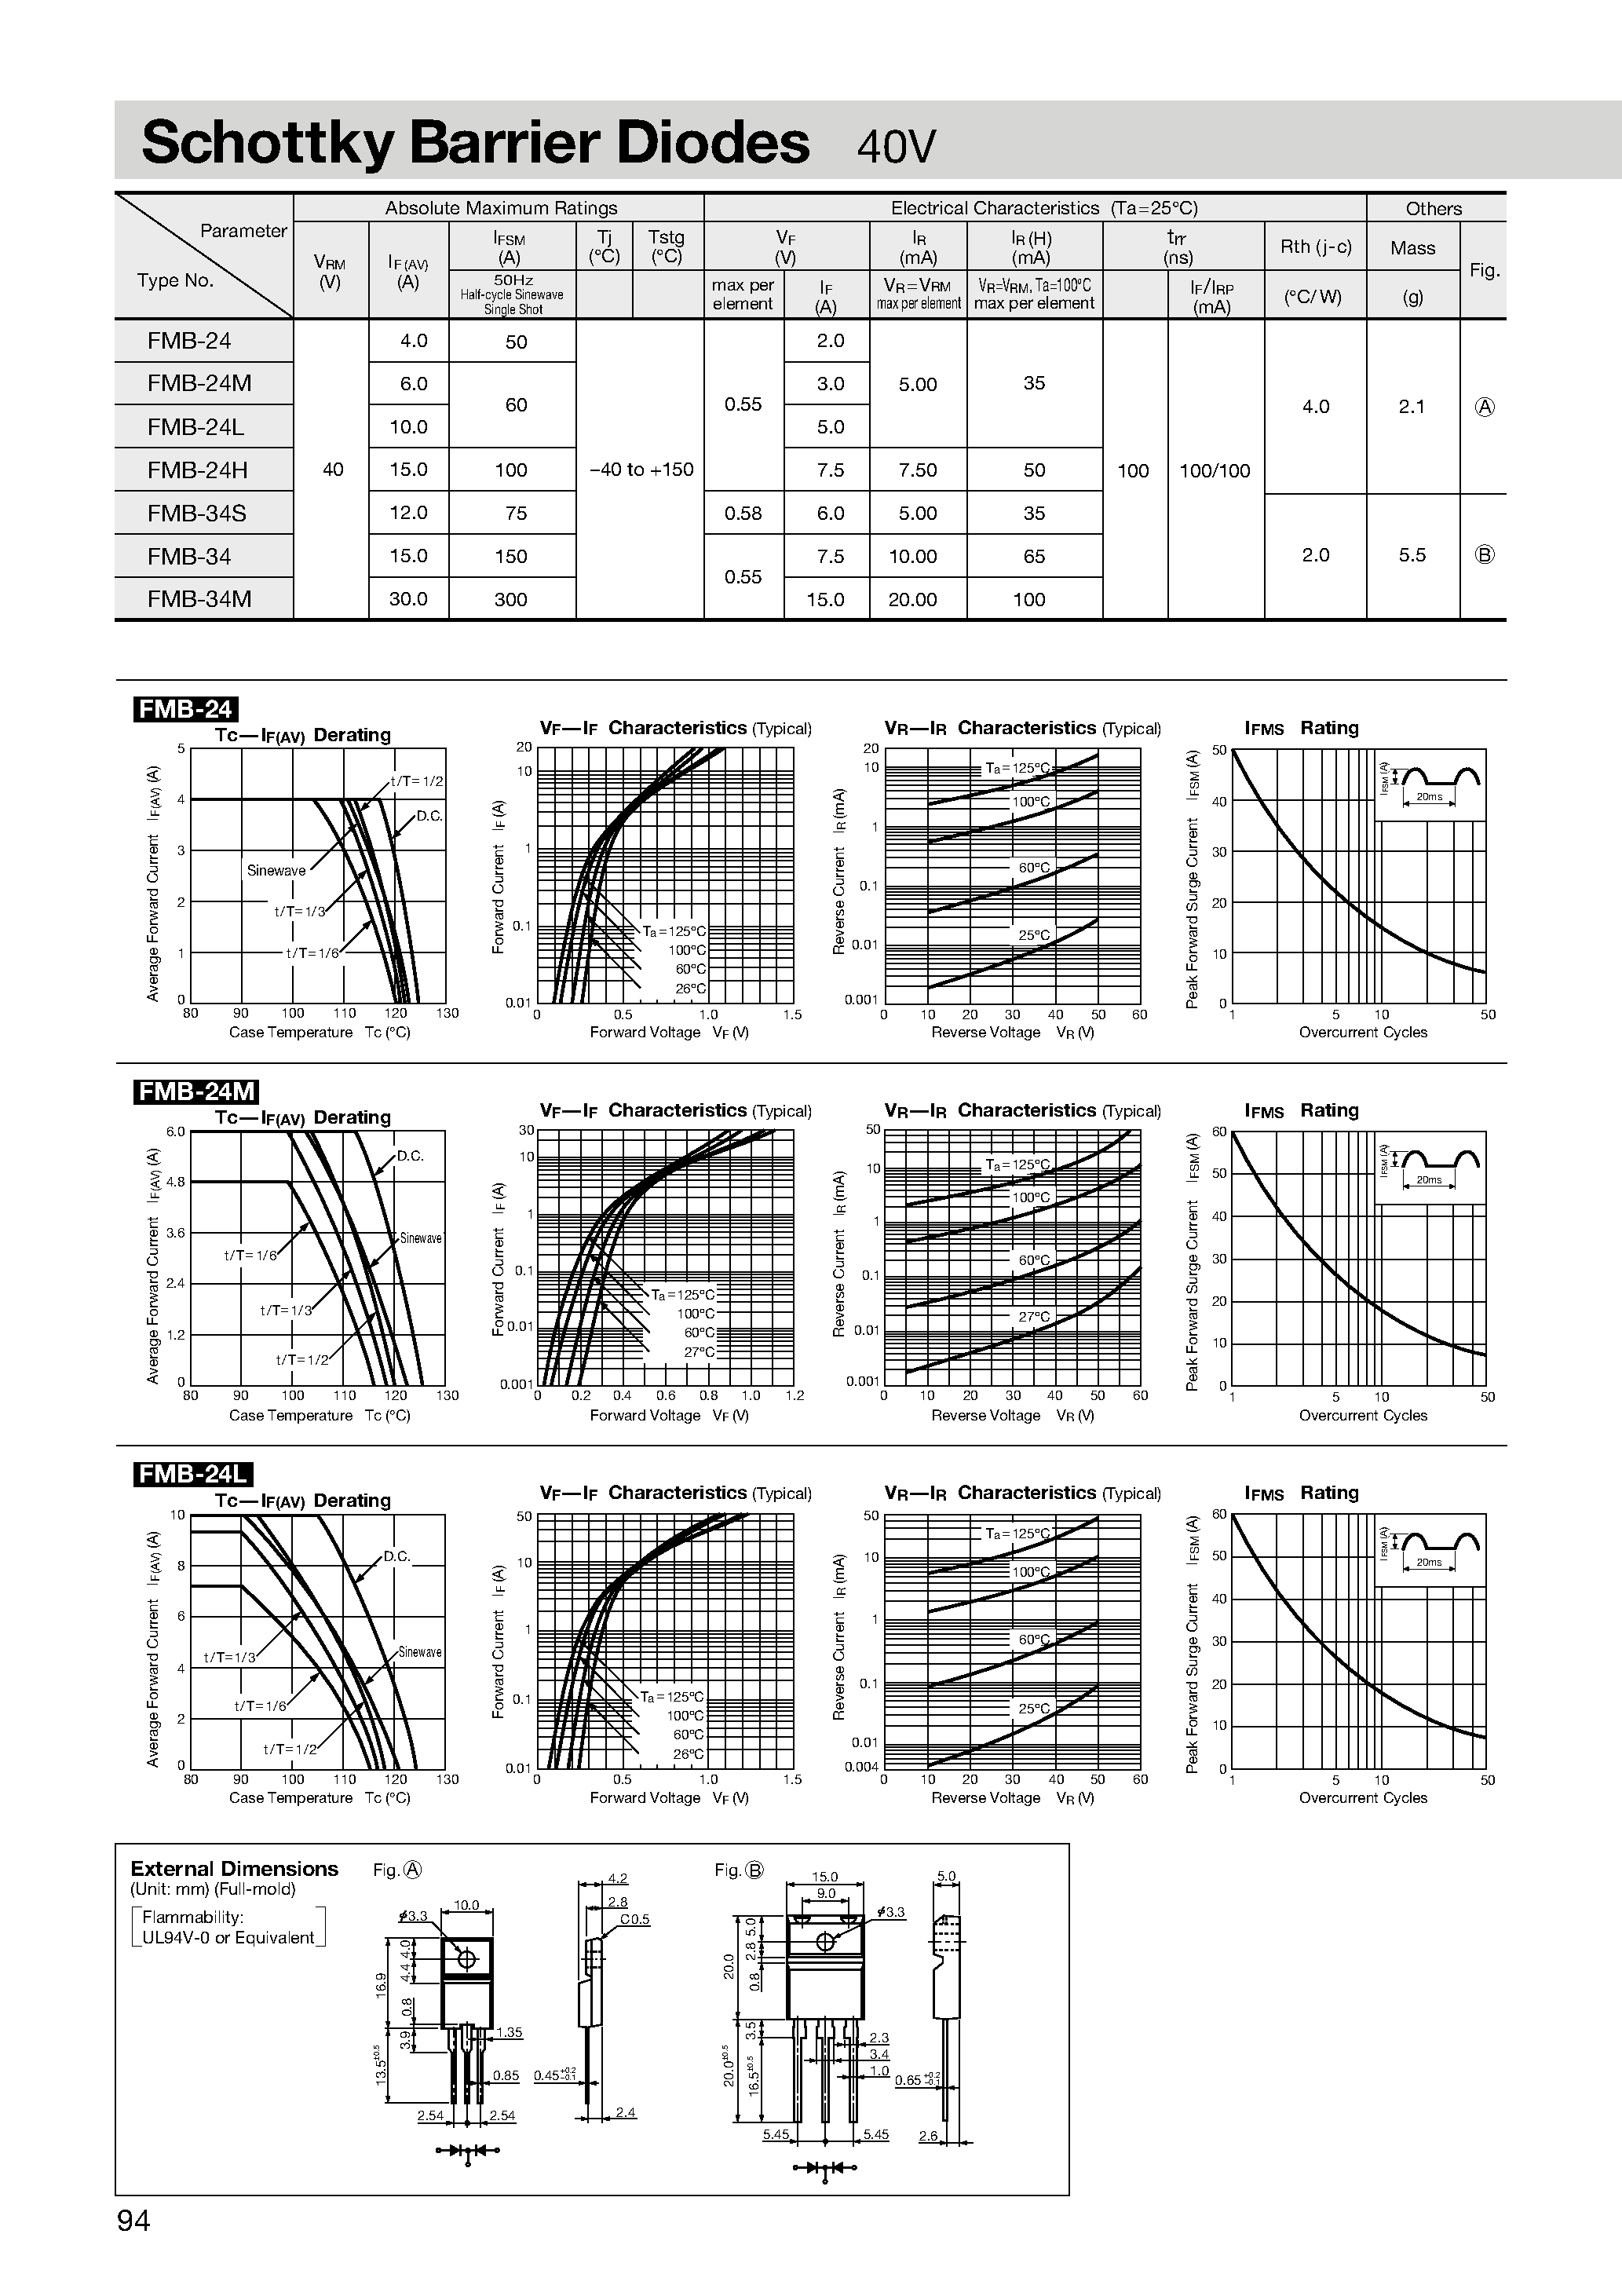 Datasheet FMB-34S - Schottky Barrier Diodes 40V page 1